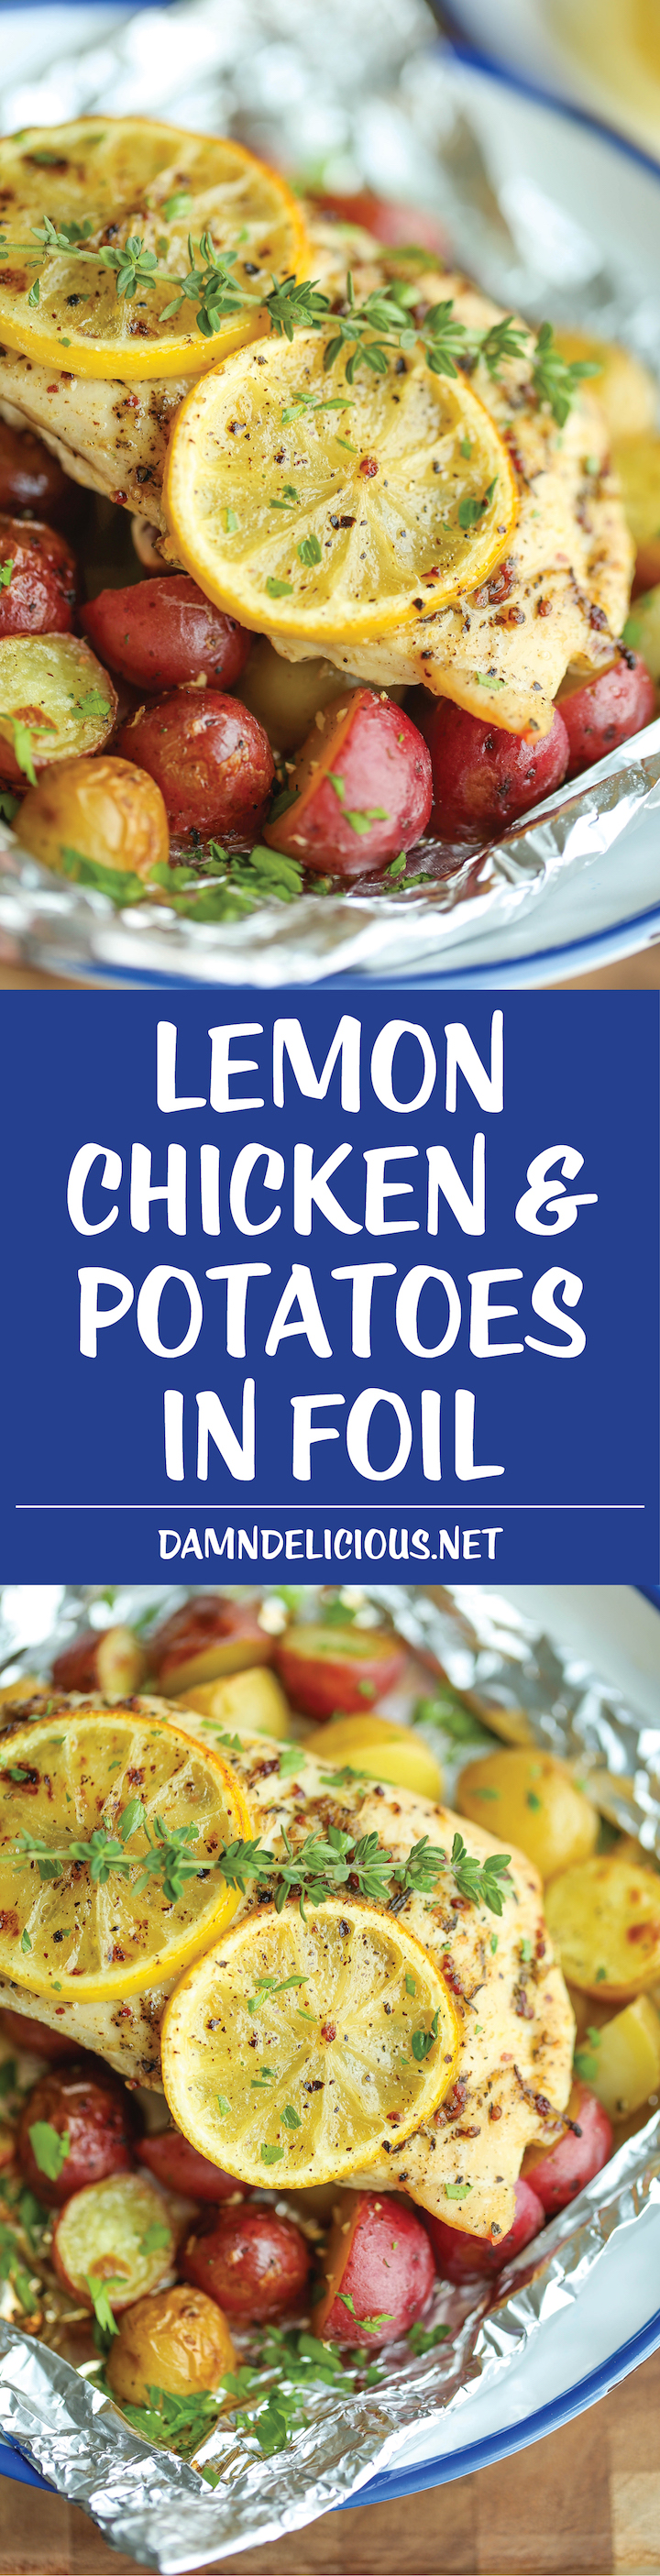 Lemon Chicken and Potatoes in Foil - The most amazingly moist and tender chicken breasts cooked in foil packets - so easy and packed with tons of flavor!